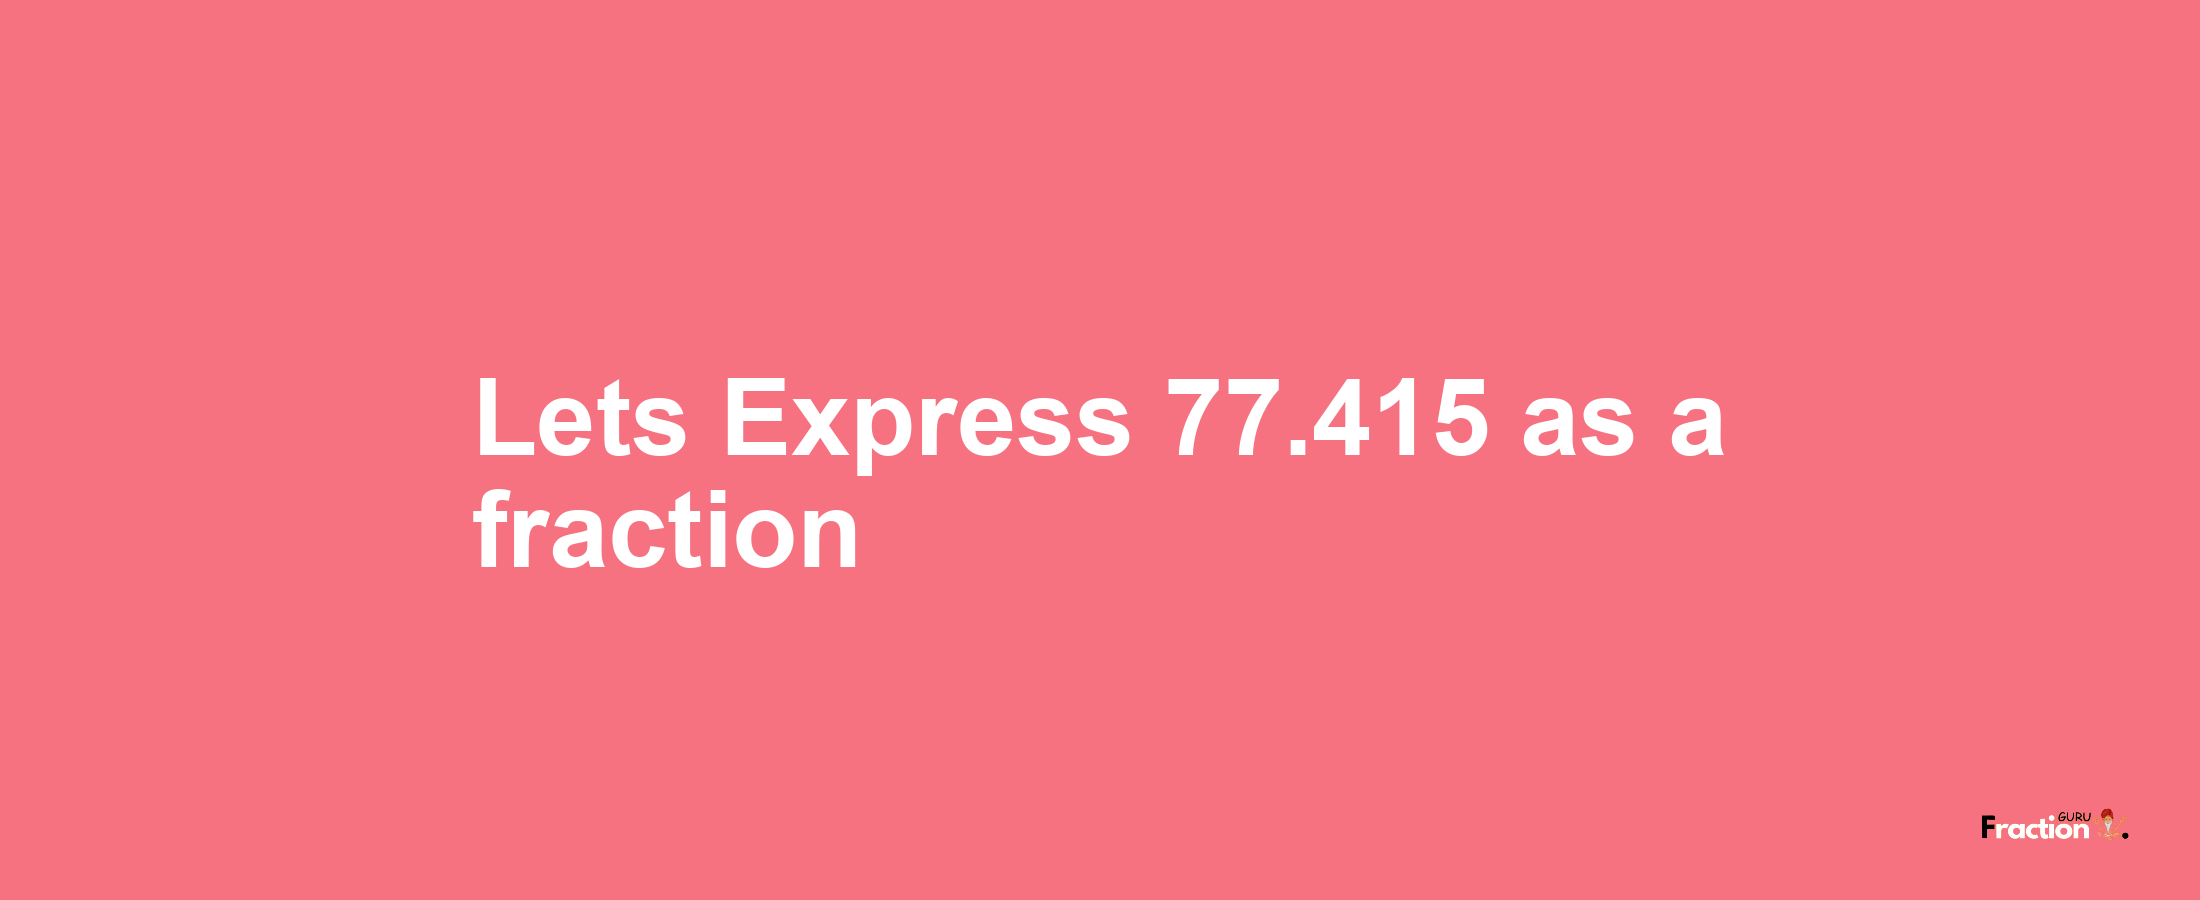 Lets Express 77.415 as afraction